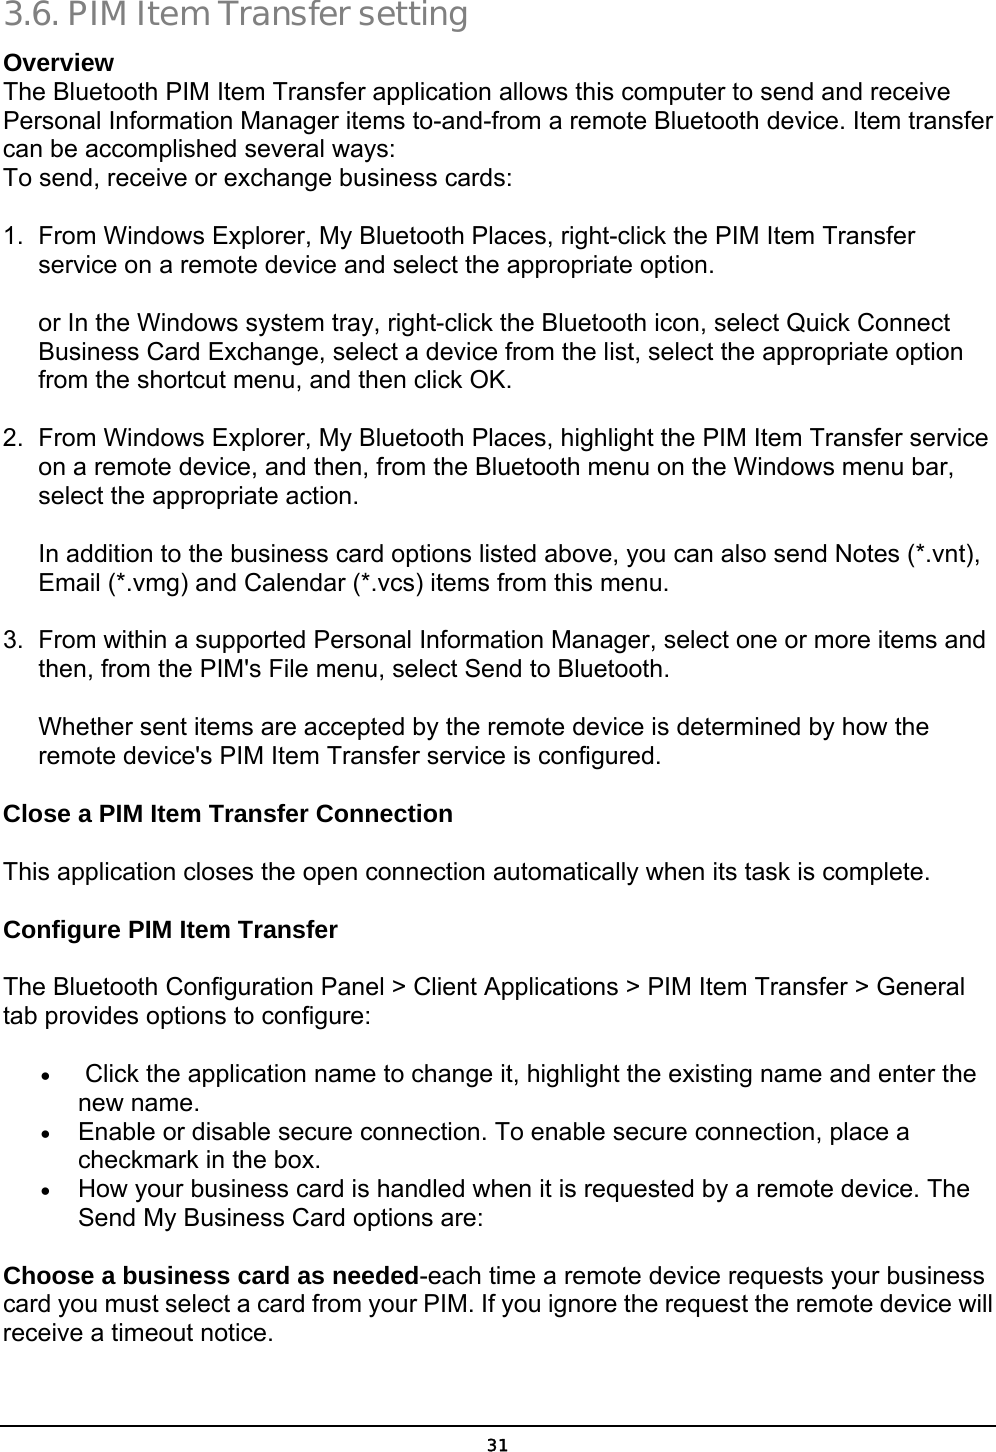  31 3.6. PIM Item Transfer setting Overview The Bluetooth PIM Item Transfer application allows this computer to send and receive Personal Information Manager items to-and-from a remote Bluetooth device. Item transfer can be accomplished several ways: To send, receive or exchange business cards: 1.  From Windows Explorer, My Bluetooth Places, right-click the PIM Item Transfer service on a remote device and select the appropriate option. or In the Windows system tray, right-click the Bluetooth icon, select Quick Connect Business Card Exchange, select a device from the list, select the appropriate option from the shortcut menu, and then click OK. 2.  From Windows Explorer, My Bluetooth Places, highlight the PIM Item Transfer service on a remote device, and then, from the Bluetooth menu on the Windows menu bar, select the appropriate action. In addition to the business card options listed above, you can also send Notes (*.vnt), Email (*.vmg) and Calendar (*.vcs) items from this menu. 3.  From within a supported Personal Information Manager, select one or more items and then, from the PIM&apos;s File menu, select Send to Bluetooth. Whether sent items are accepted by the remote device is determined by how the remote device&apos;s PIM Item Transfer service is configured. Close a PIM Item Transfer Connection This application closes the open connection automatically when its task is complete. Configure PIM Item Transfer   The Bluetooth Configuration Panel &gt; Client Applications &gt; PIM Item Transfer &gt; General tab provides options to configure: •   Click the application name to change it, highlight the existing name and enter the new name. •  Enable or disable secure connection. To enable secure connection, place a checkmark in the box. •  How your business card is handled when it is requested by a remote device. The Send My Business Card options are: Choose a business card as needed-each time a remote device requests your business card you must select a card from your PIM. If you ignore the request the remote device will receive a timeout notice. 